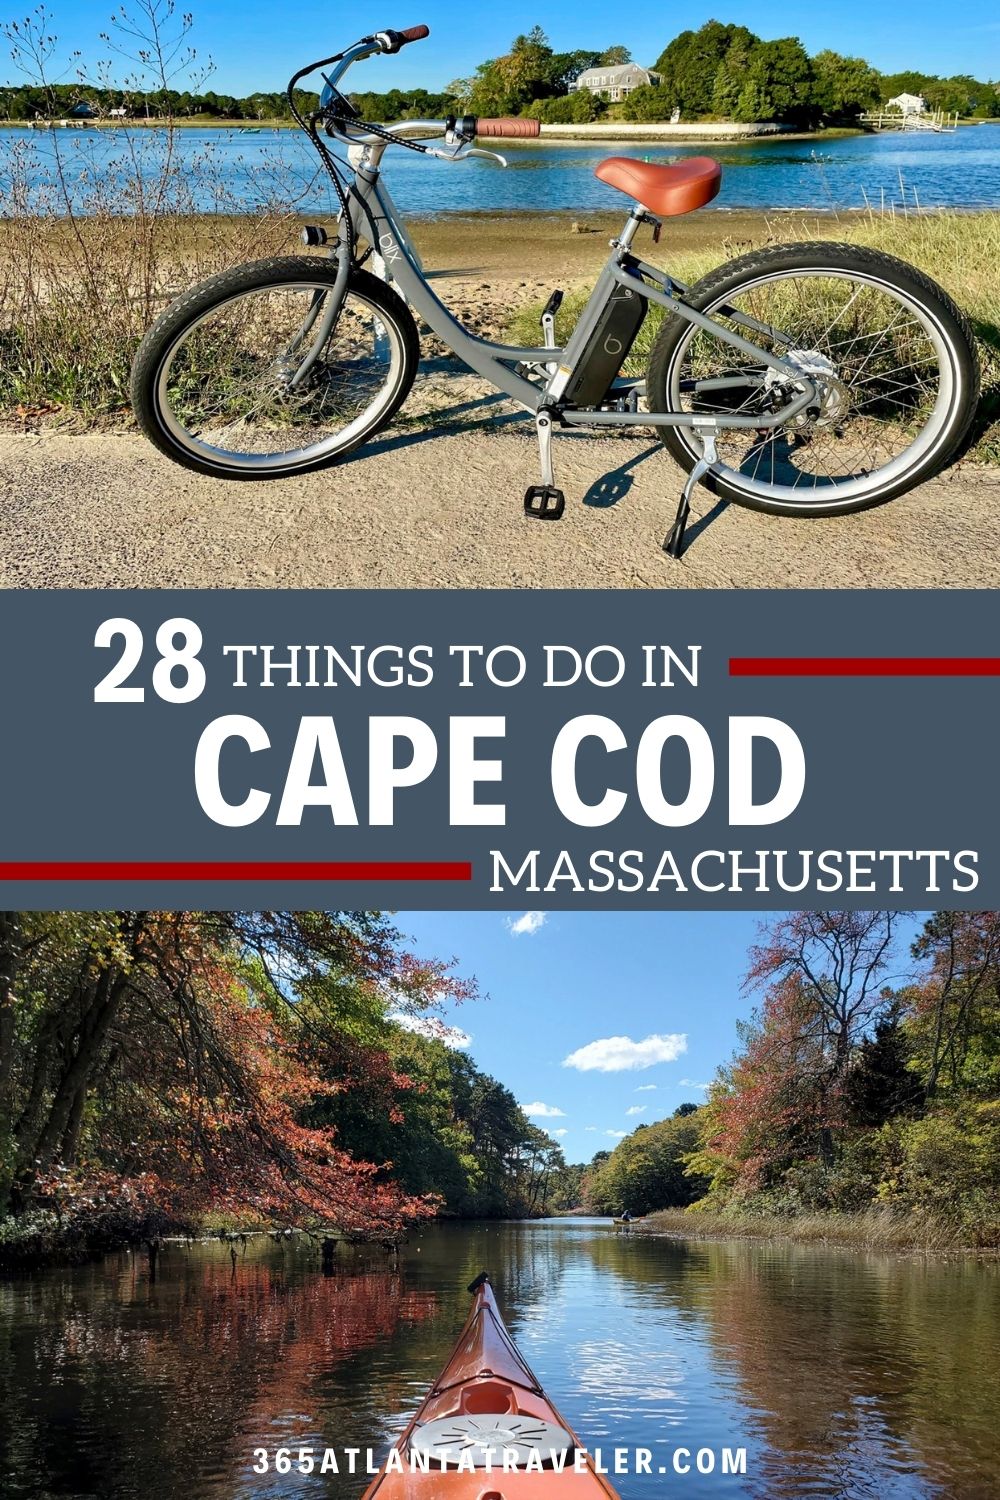 28 Things To Do in Cape Cod You Just Can’t Miss